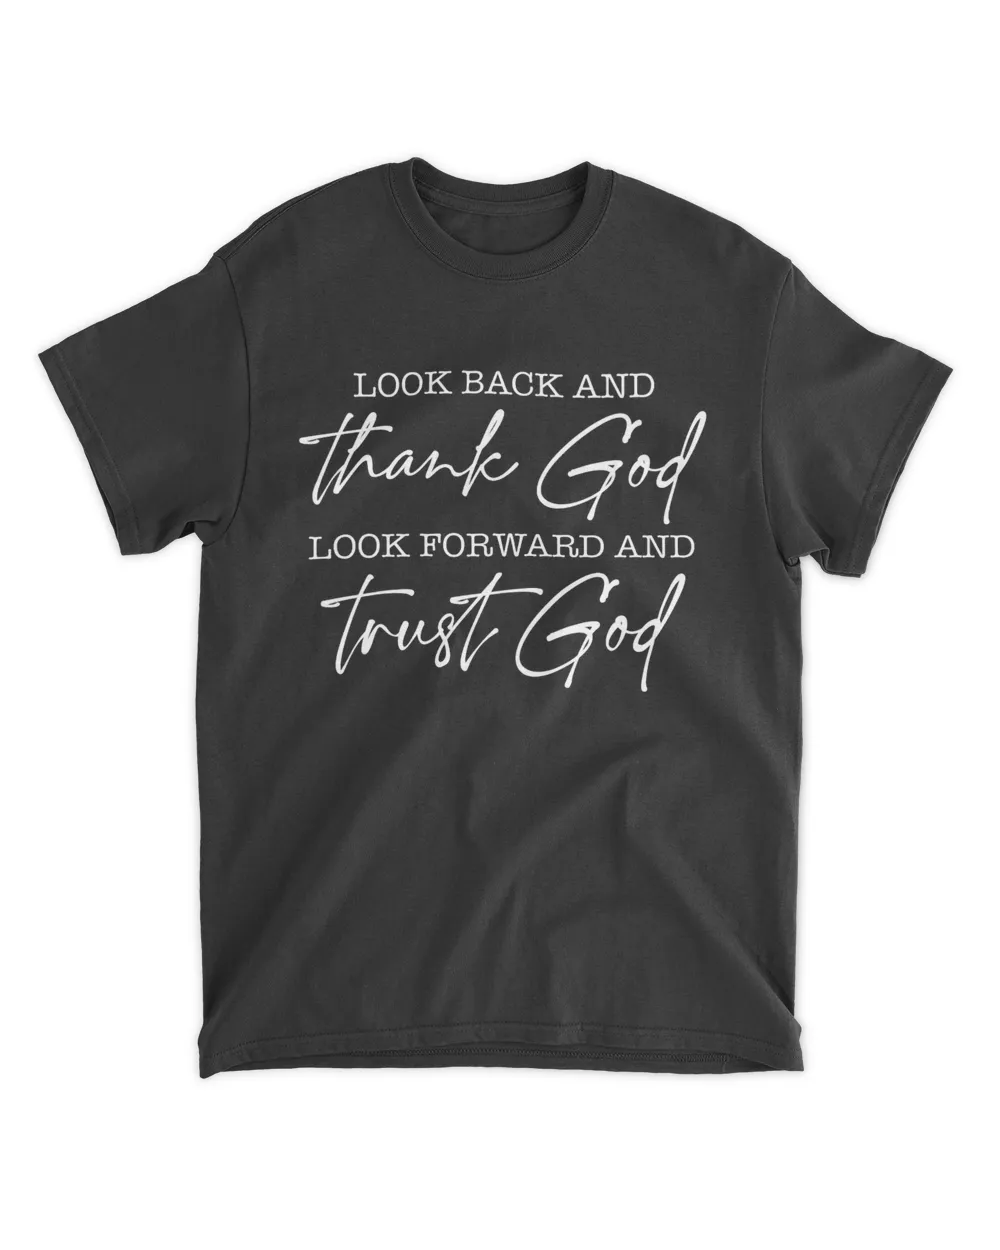 Look back and thank God look forward and Trust God shirt